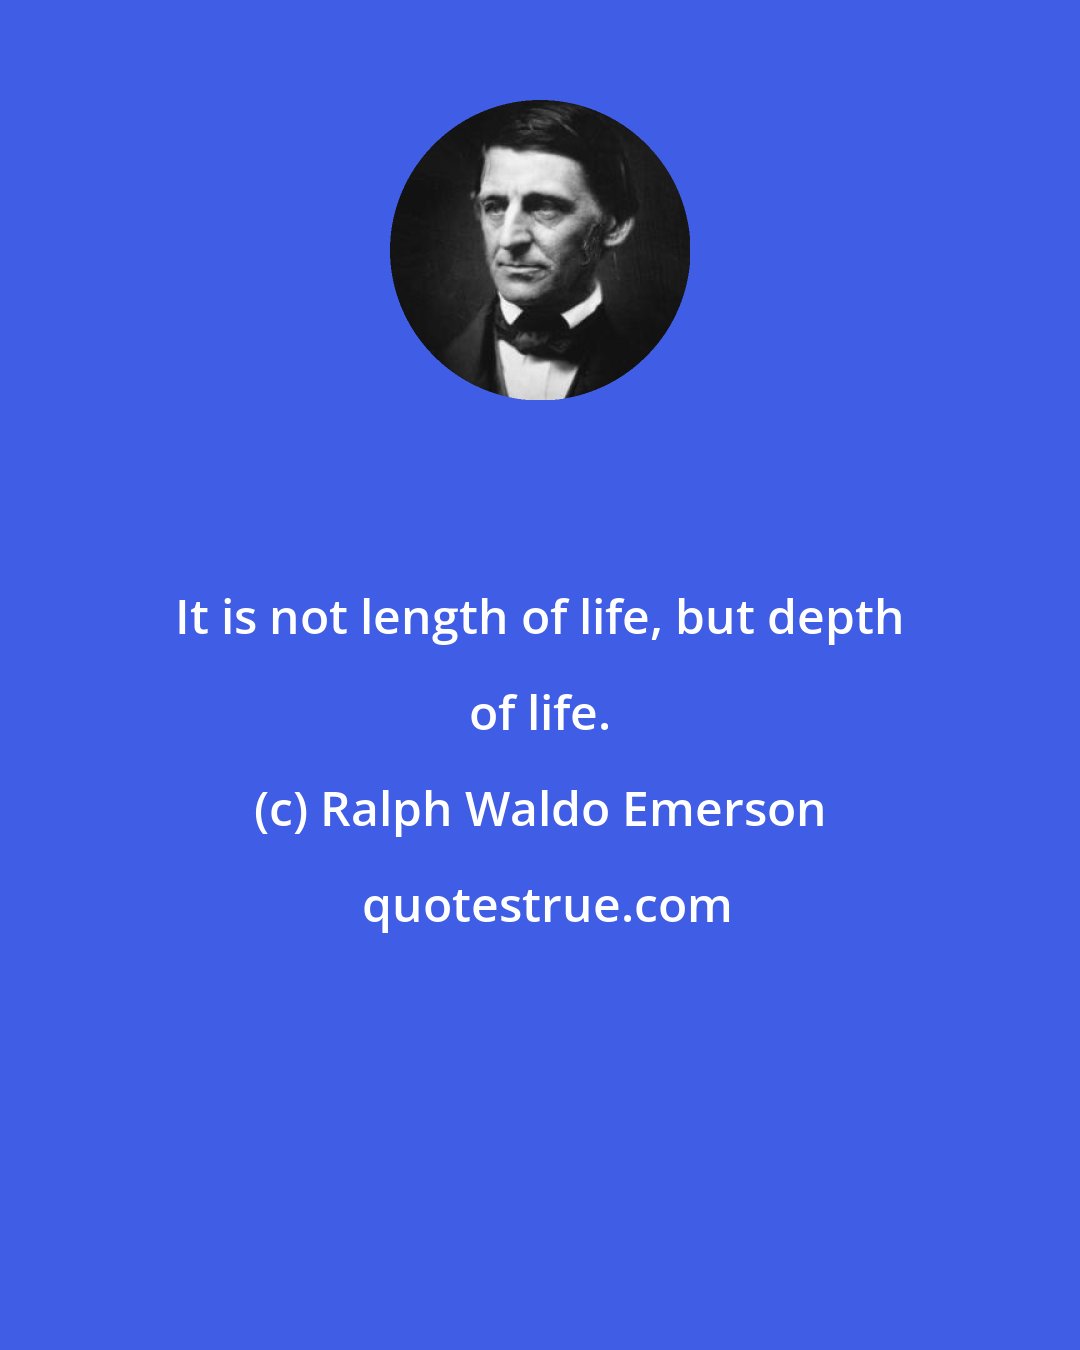 Ralph Waldo Emerson: It is not length of life, but depth of life.